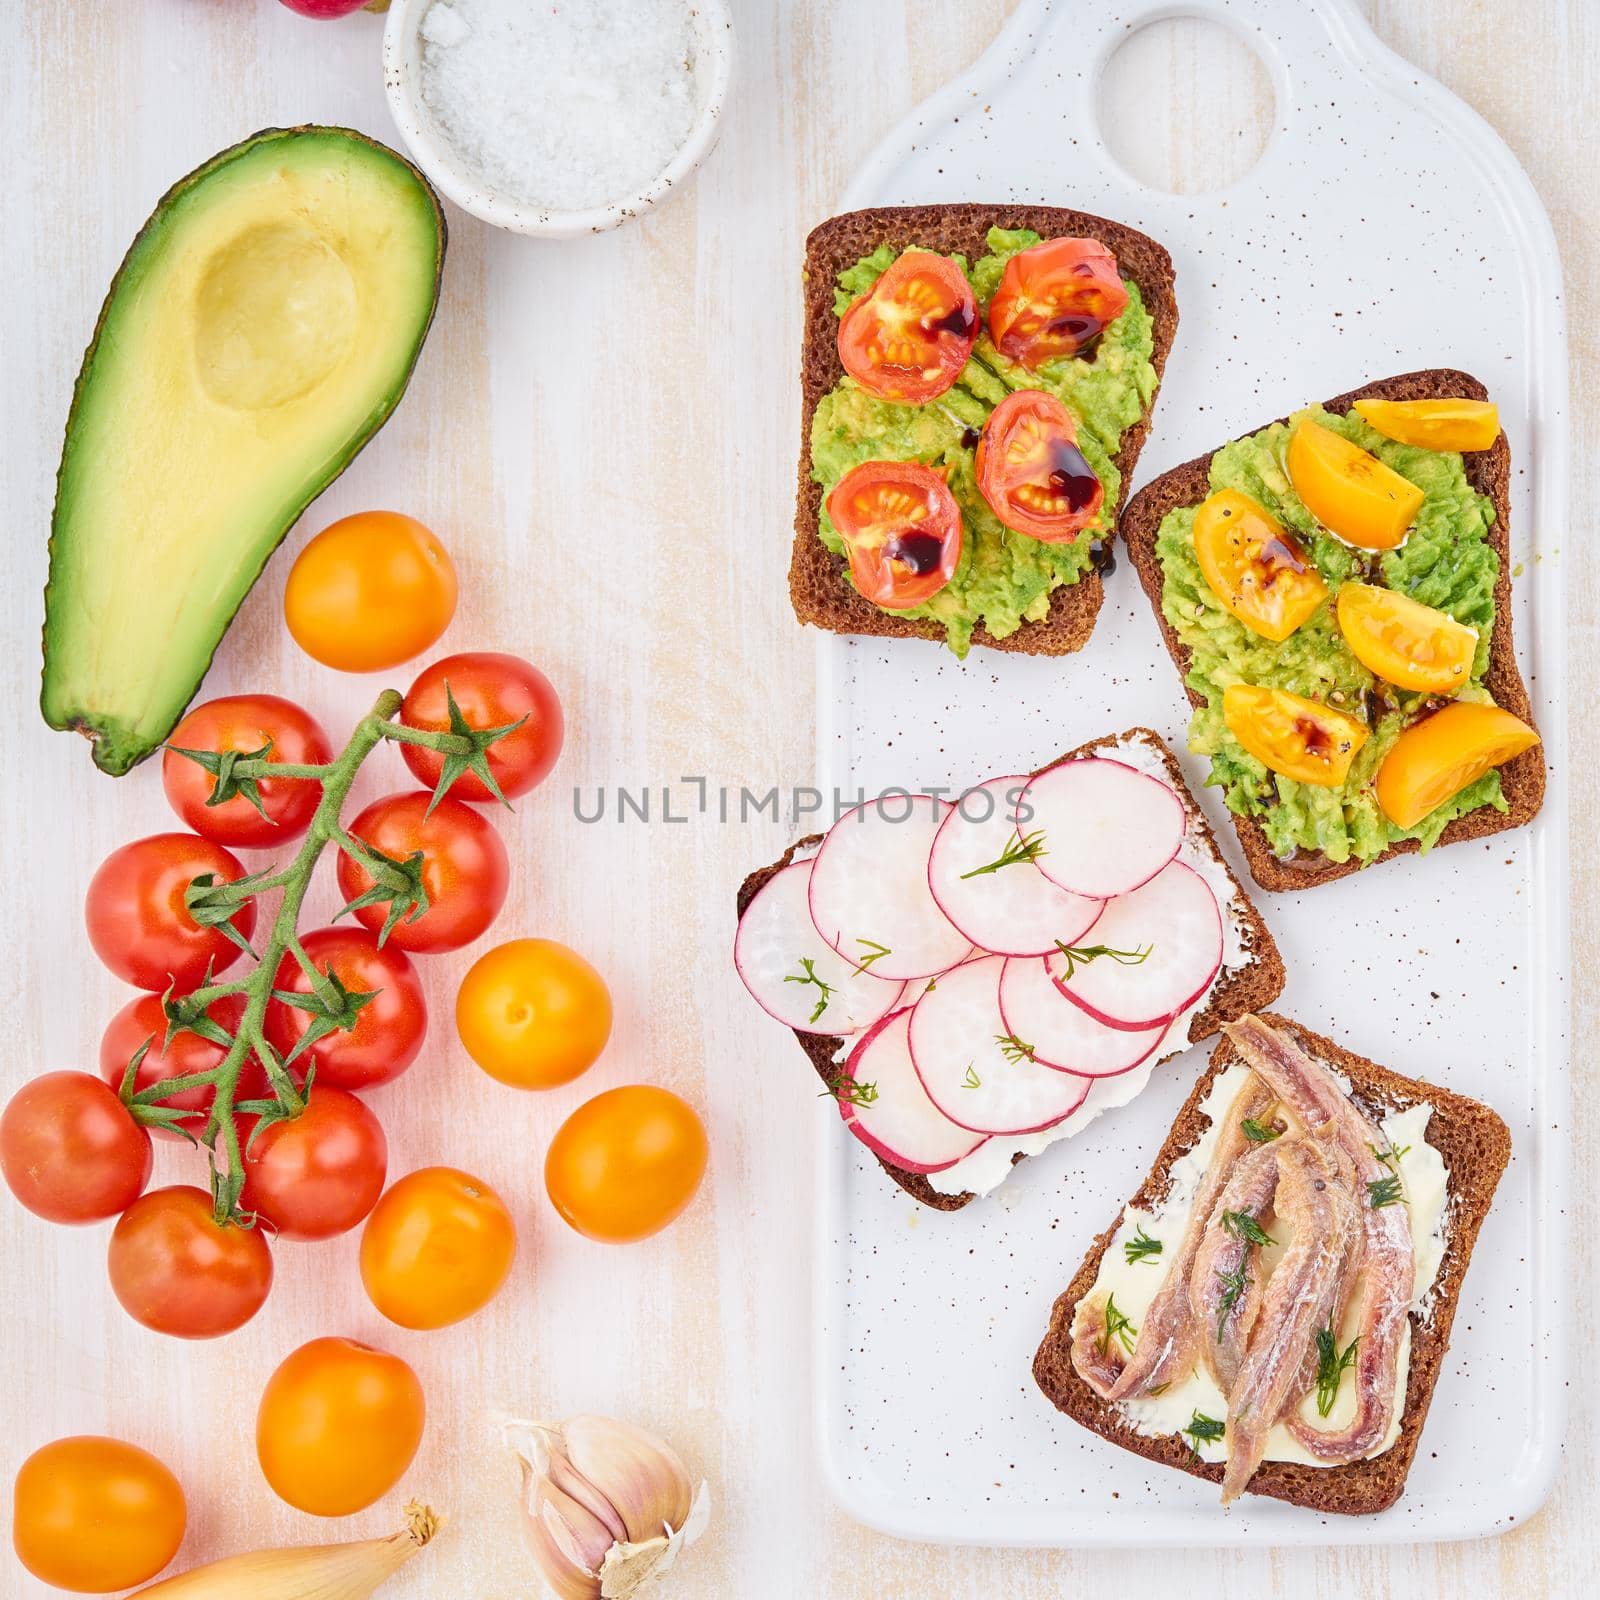 Set of smorrebrods with fish, anchovies, avocado, tomatoes, radish. Top view, white board, white background